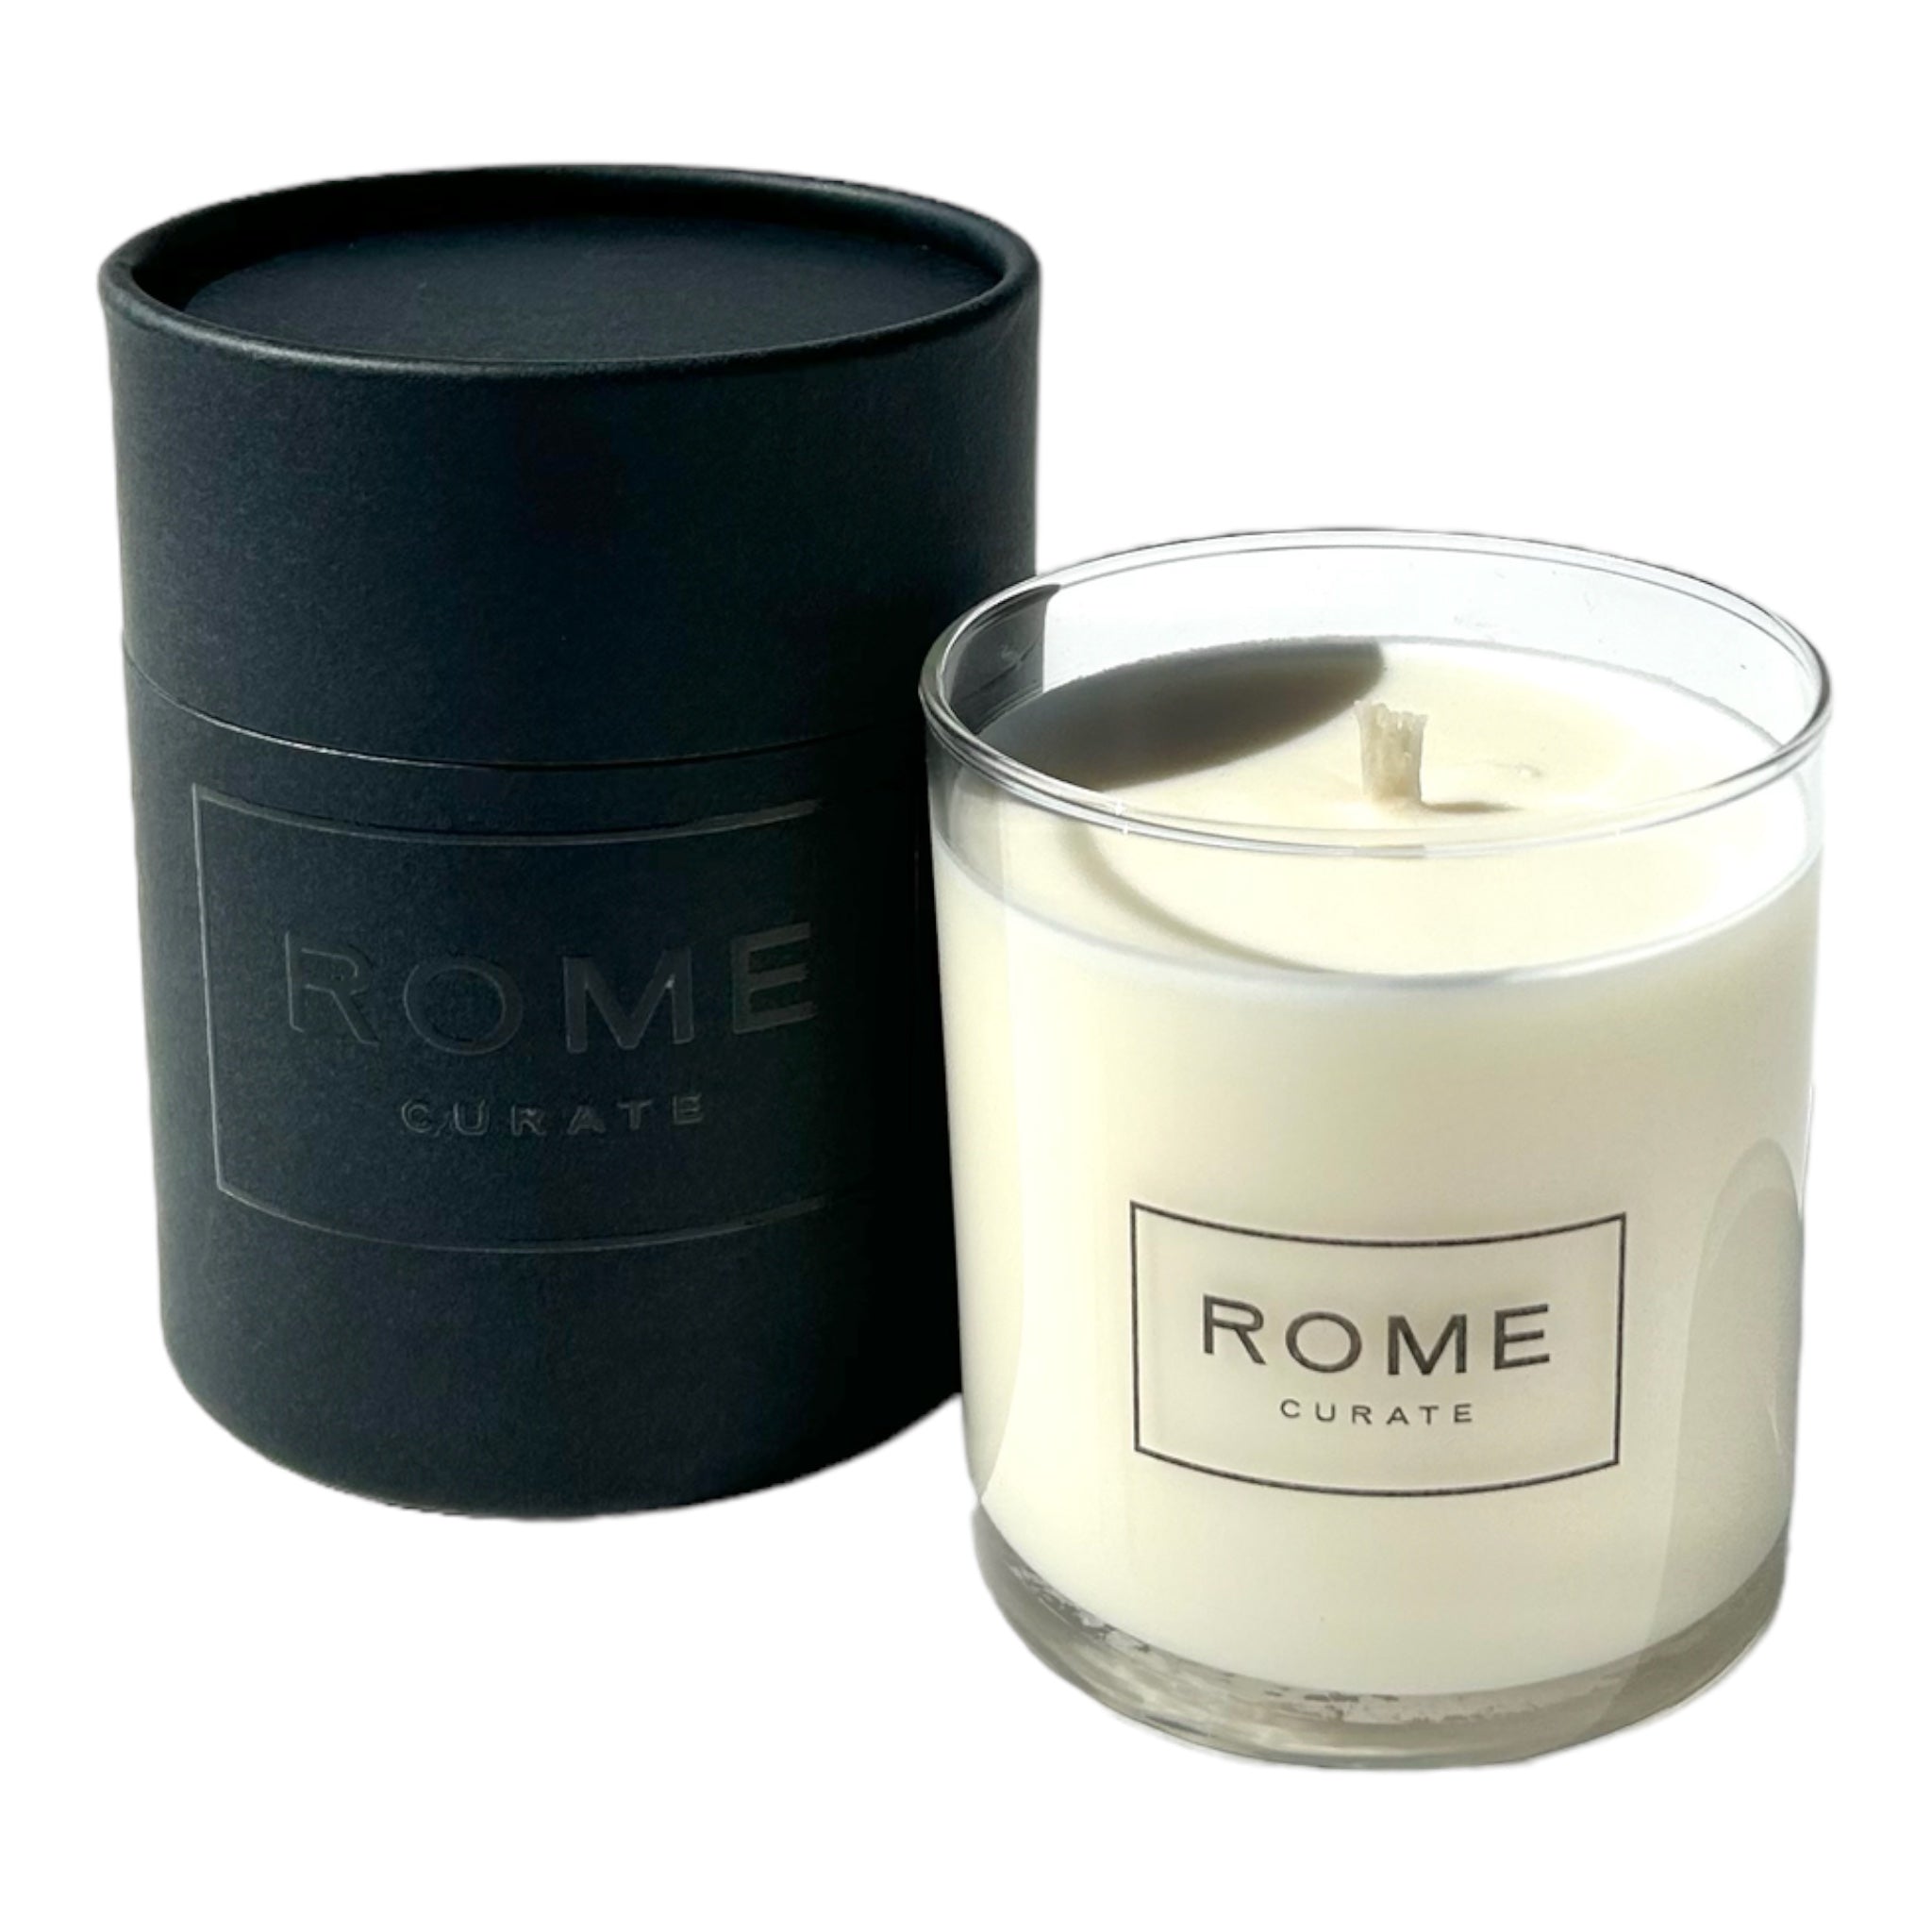 Bogart is a masculine and crisp scented soy candle 